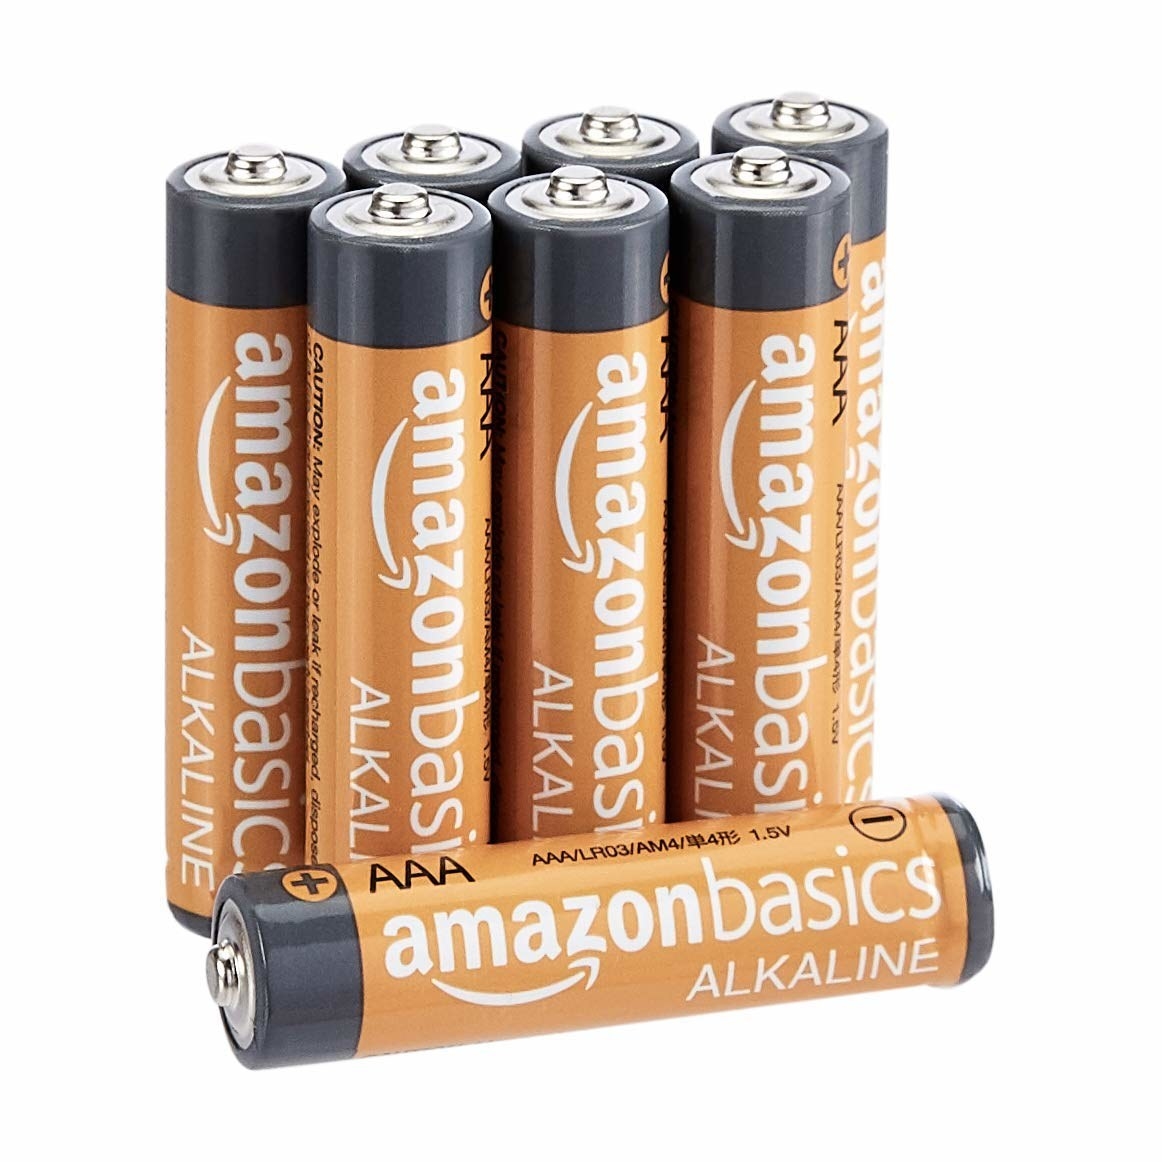 A set of multiple AAA batteries in brown and black